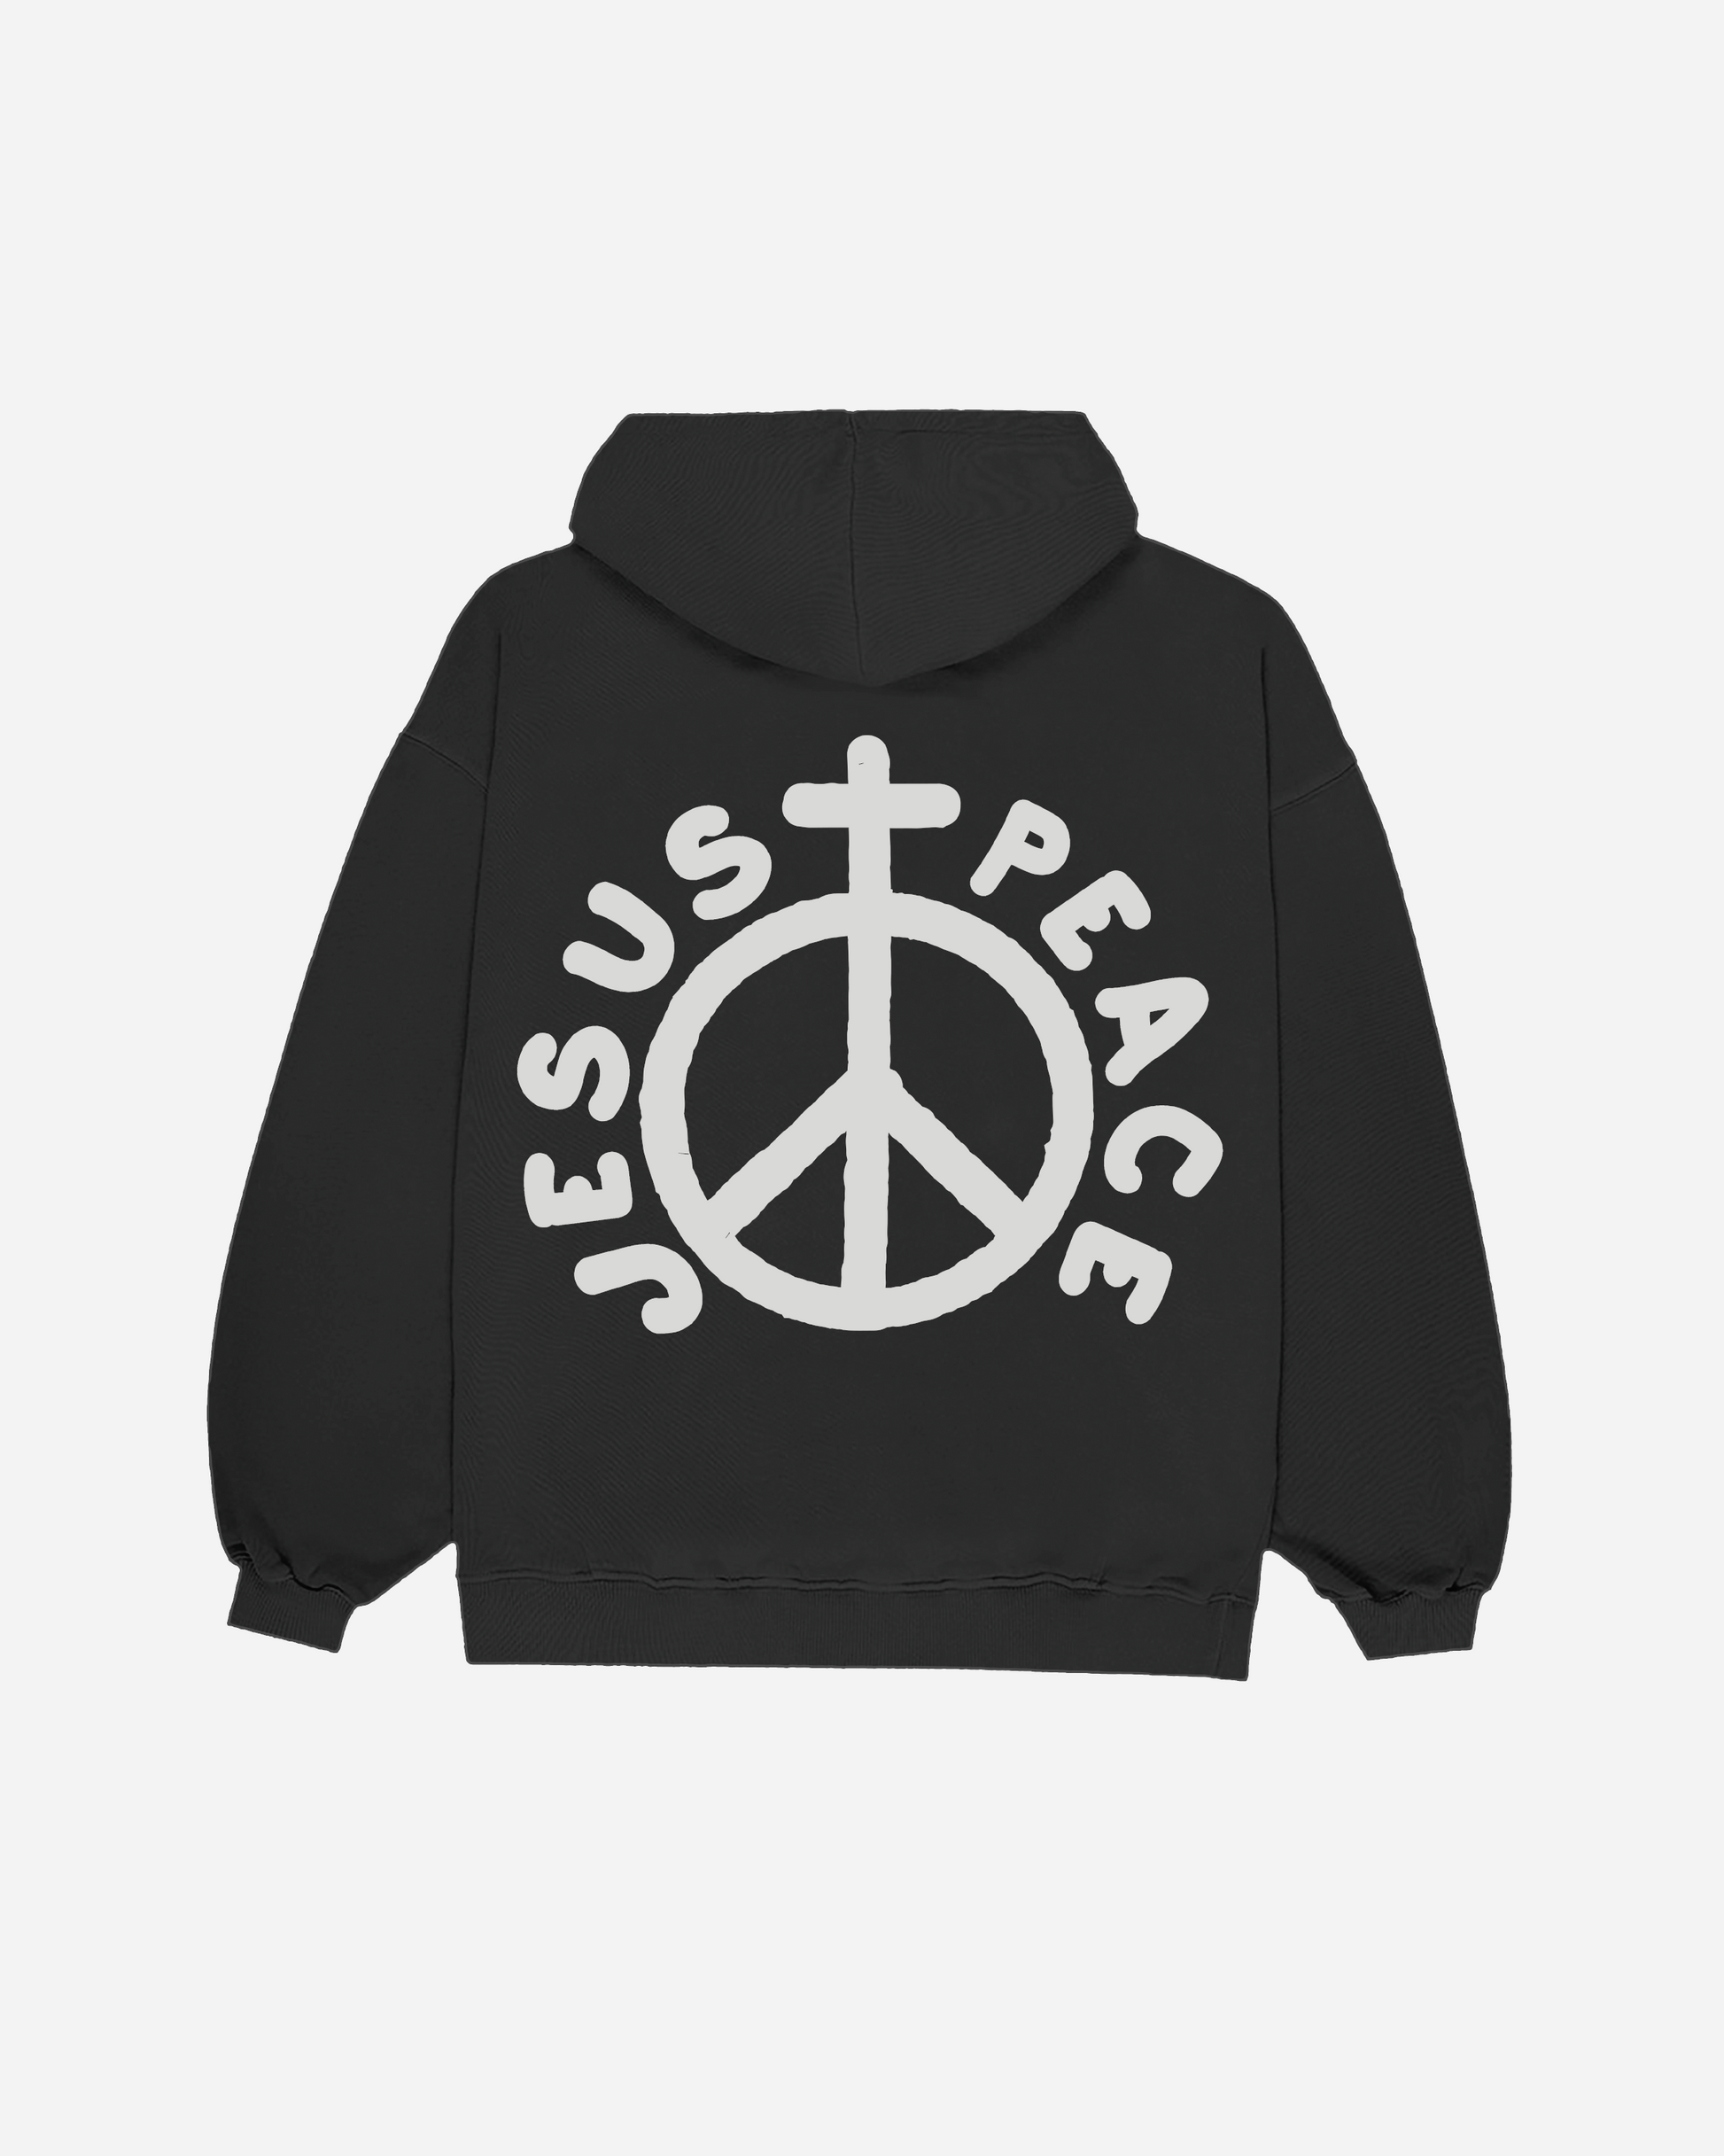 "Jesus Peace" Christian Hoodie Sweatshirt in Royal for the modern day Jesus People movement. Inspired by the words of 2 Thessalonians. Made in the USA by NHIM Apparel Christian Clothing Brand